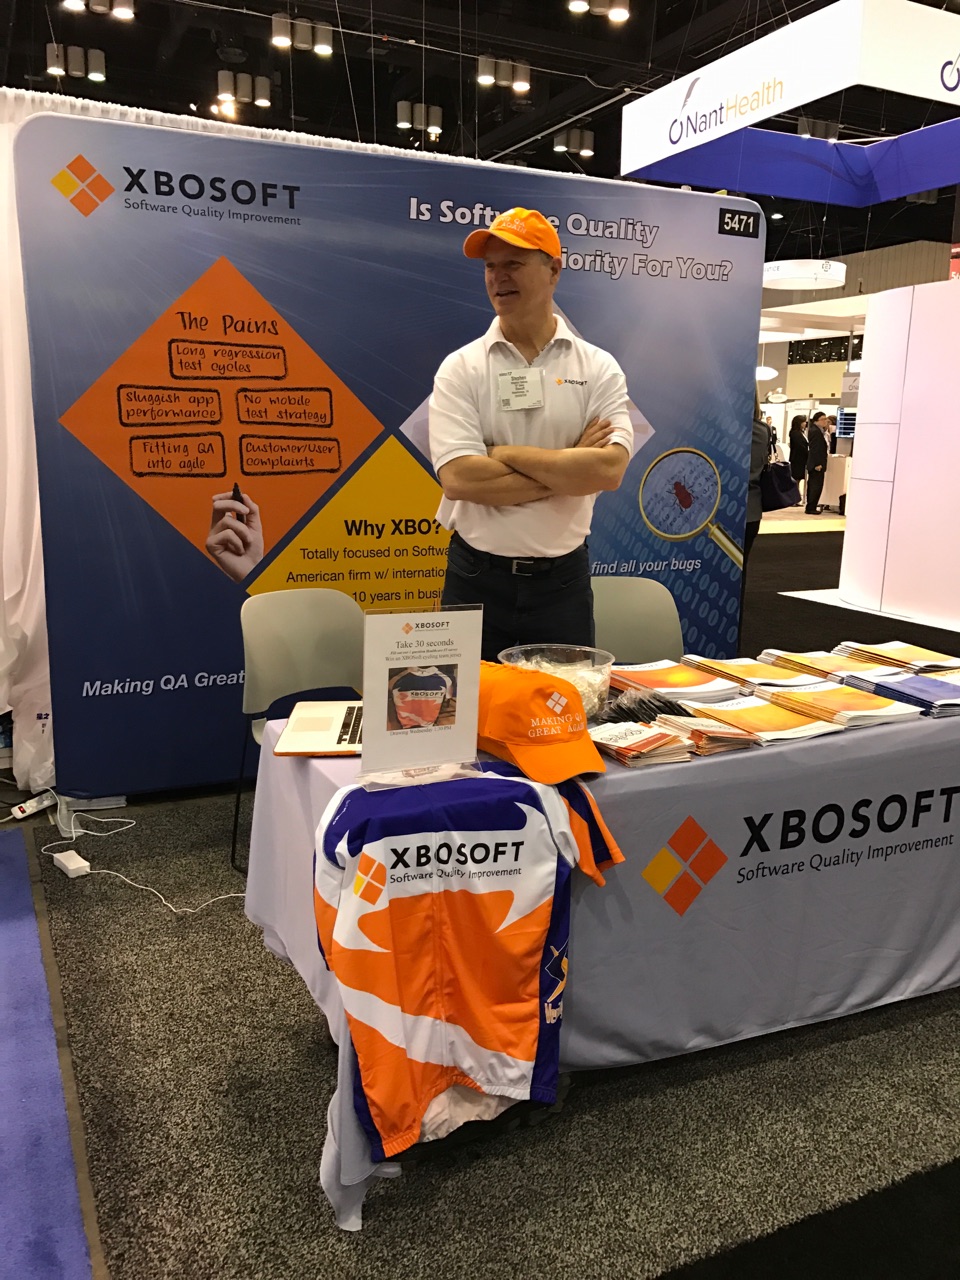 XBOSoft Brings Healthcare QA Expertise to HiMSS in Orlando